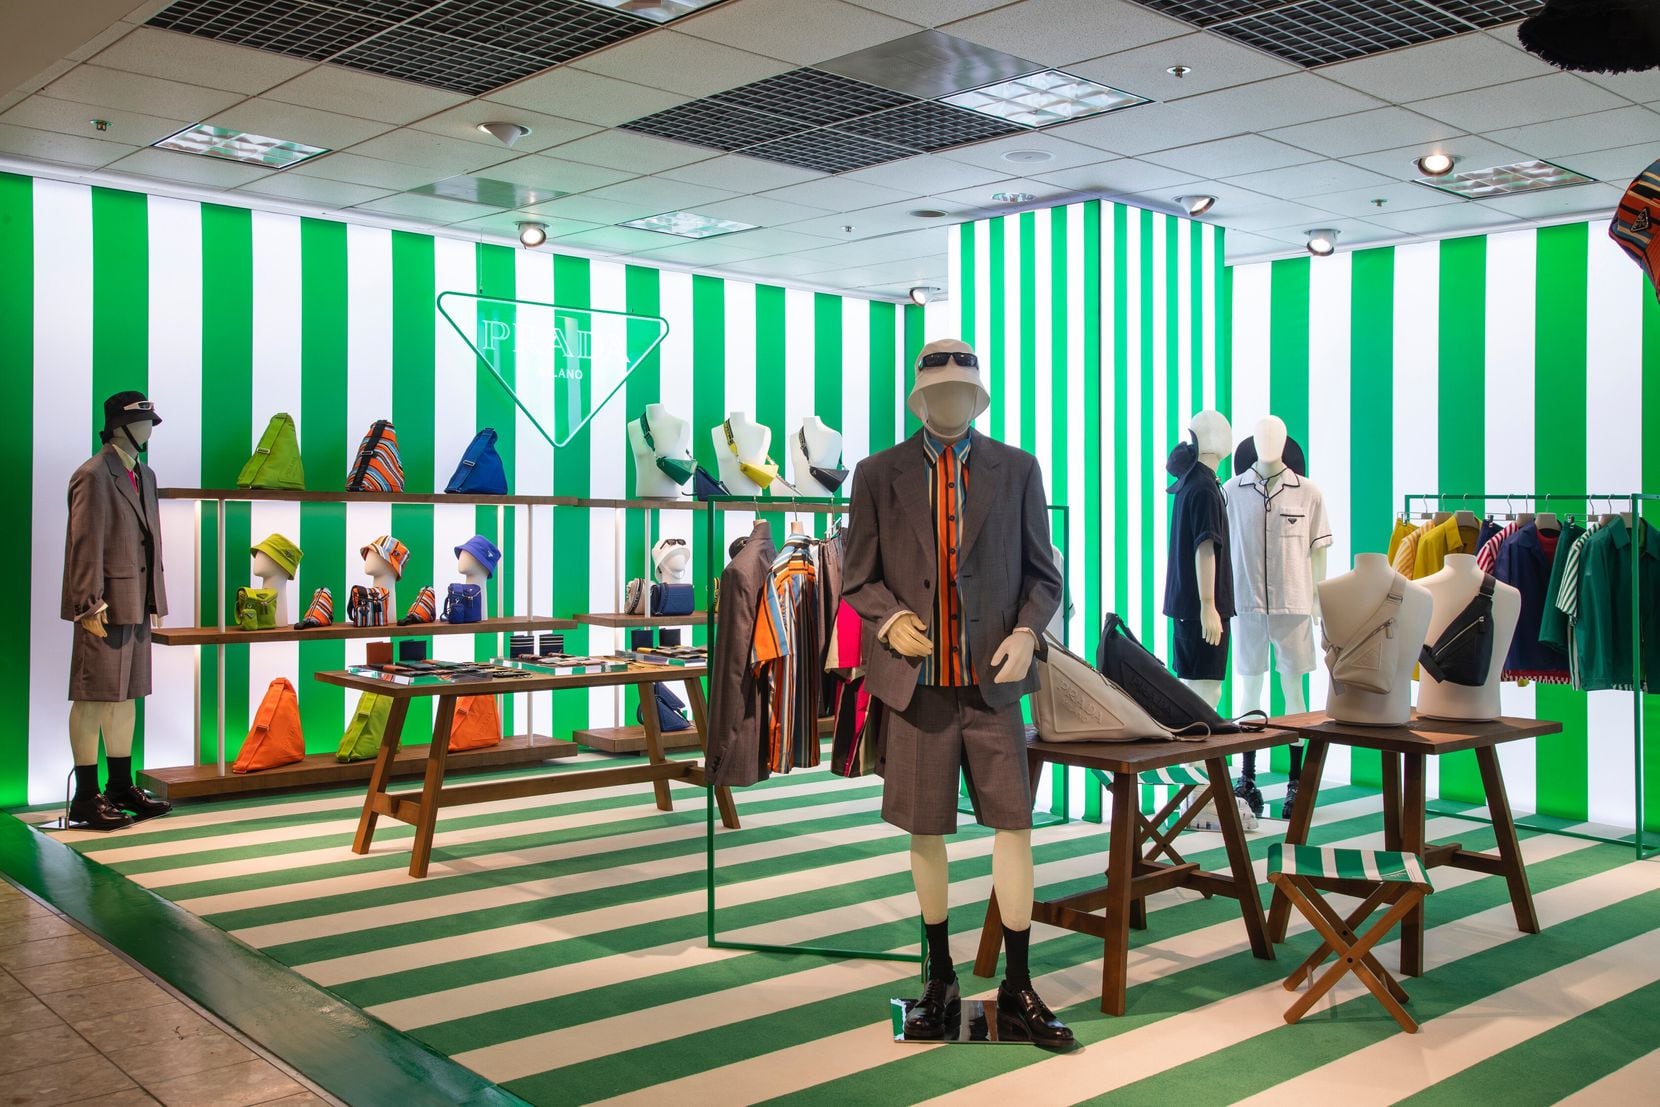 The Prada pop-up at the Neiman Marcus store at NorthPark Center was open May 11 through June 1.